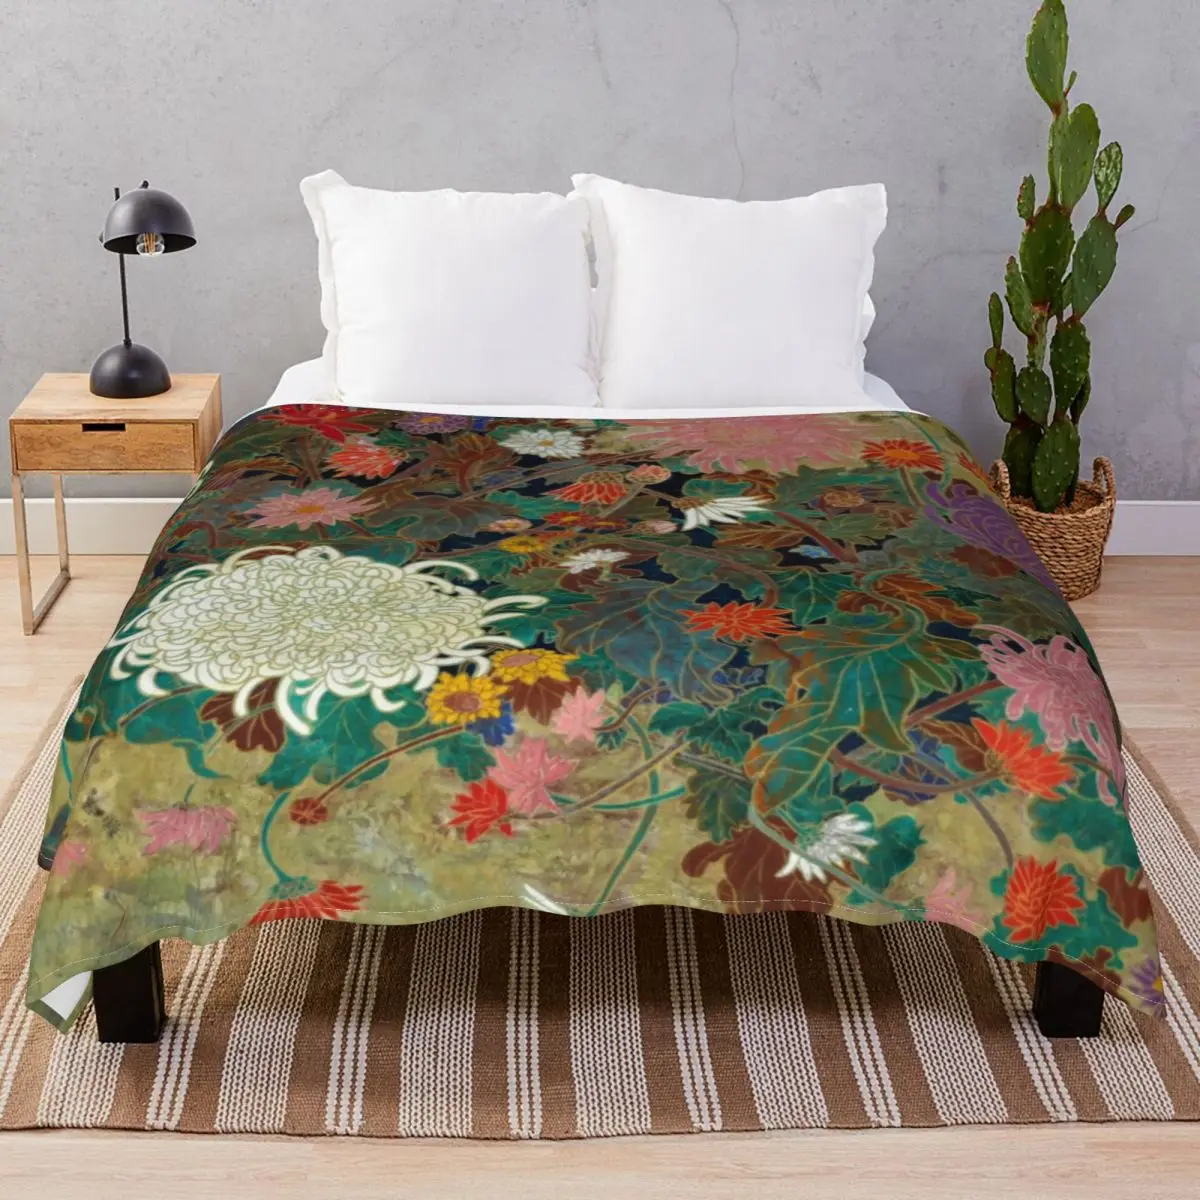 FlowerJapanese Painting Blankets Flannel Print Fluffy Throw Blanket for Bed Home Couch Camp Cinema